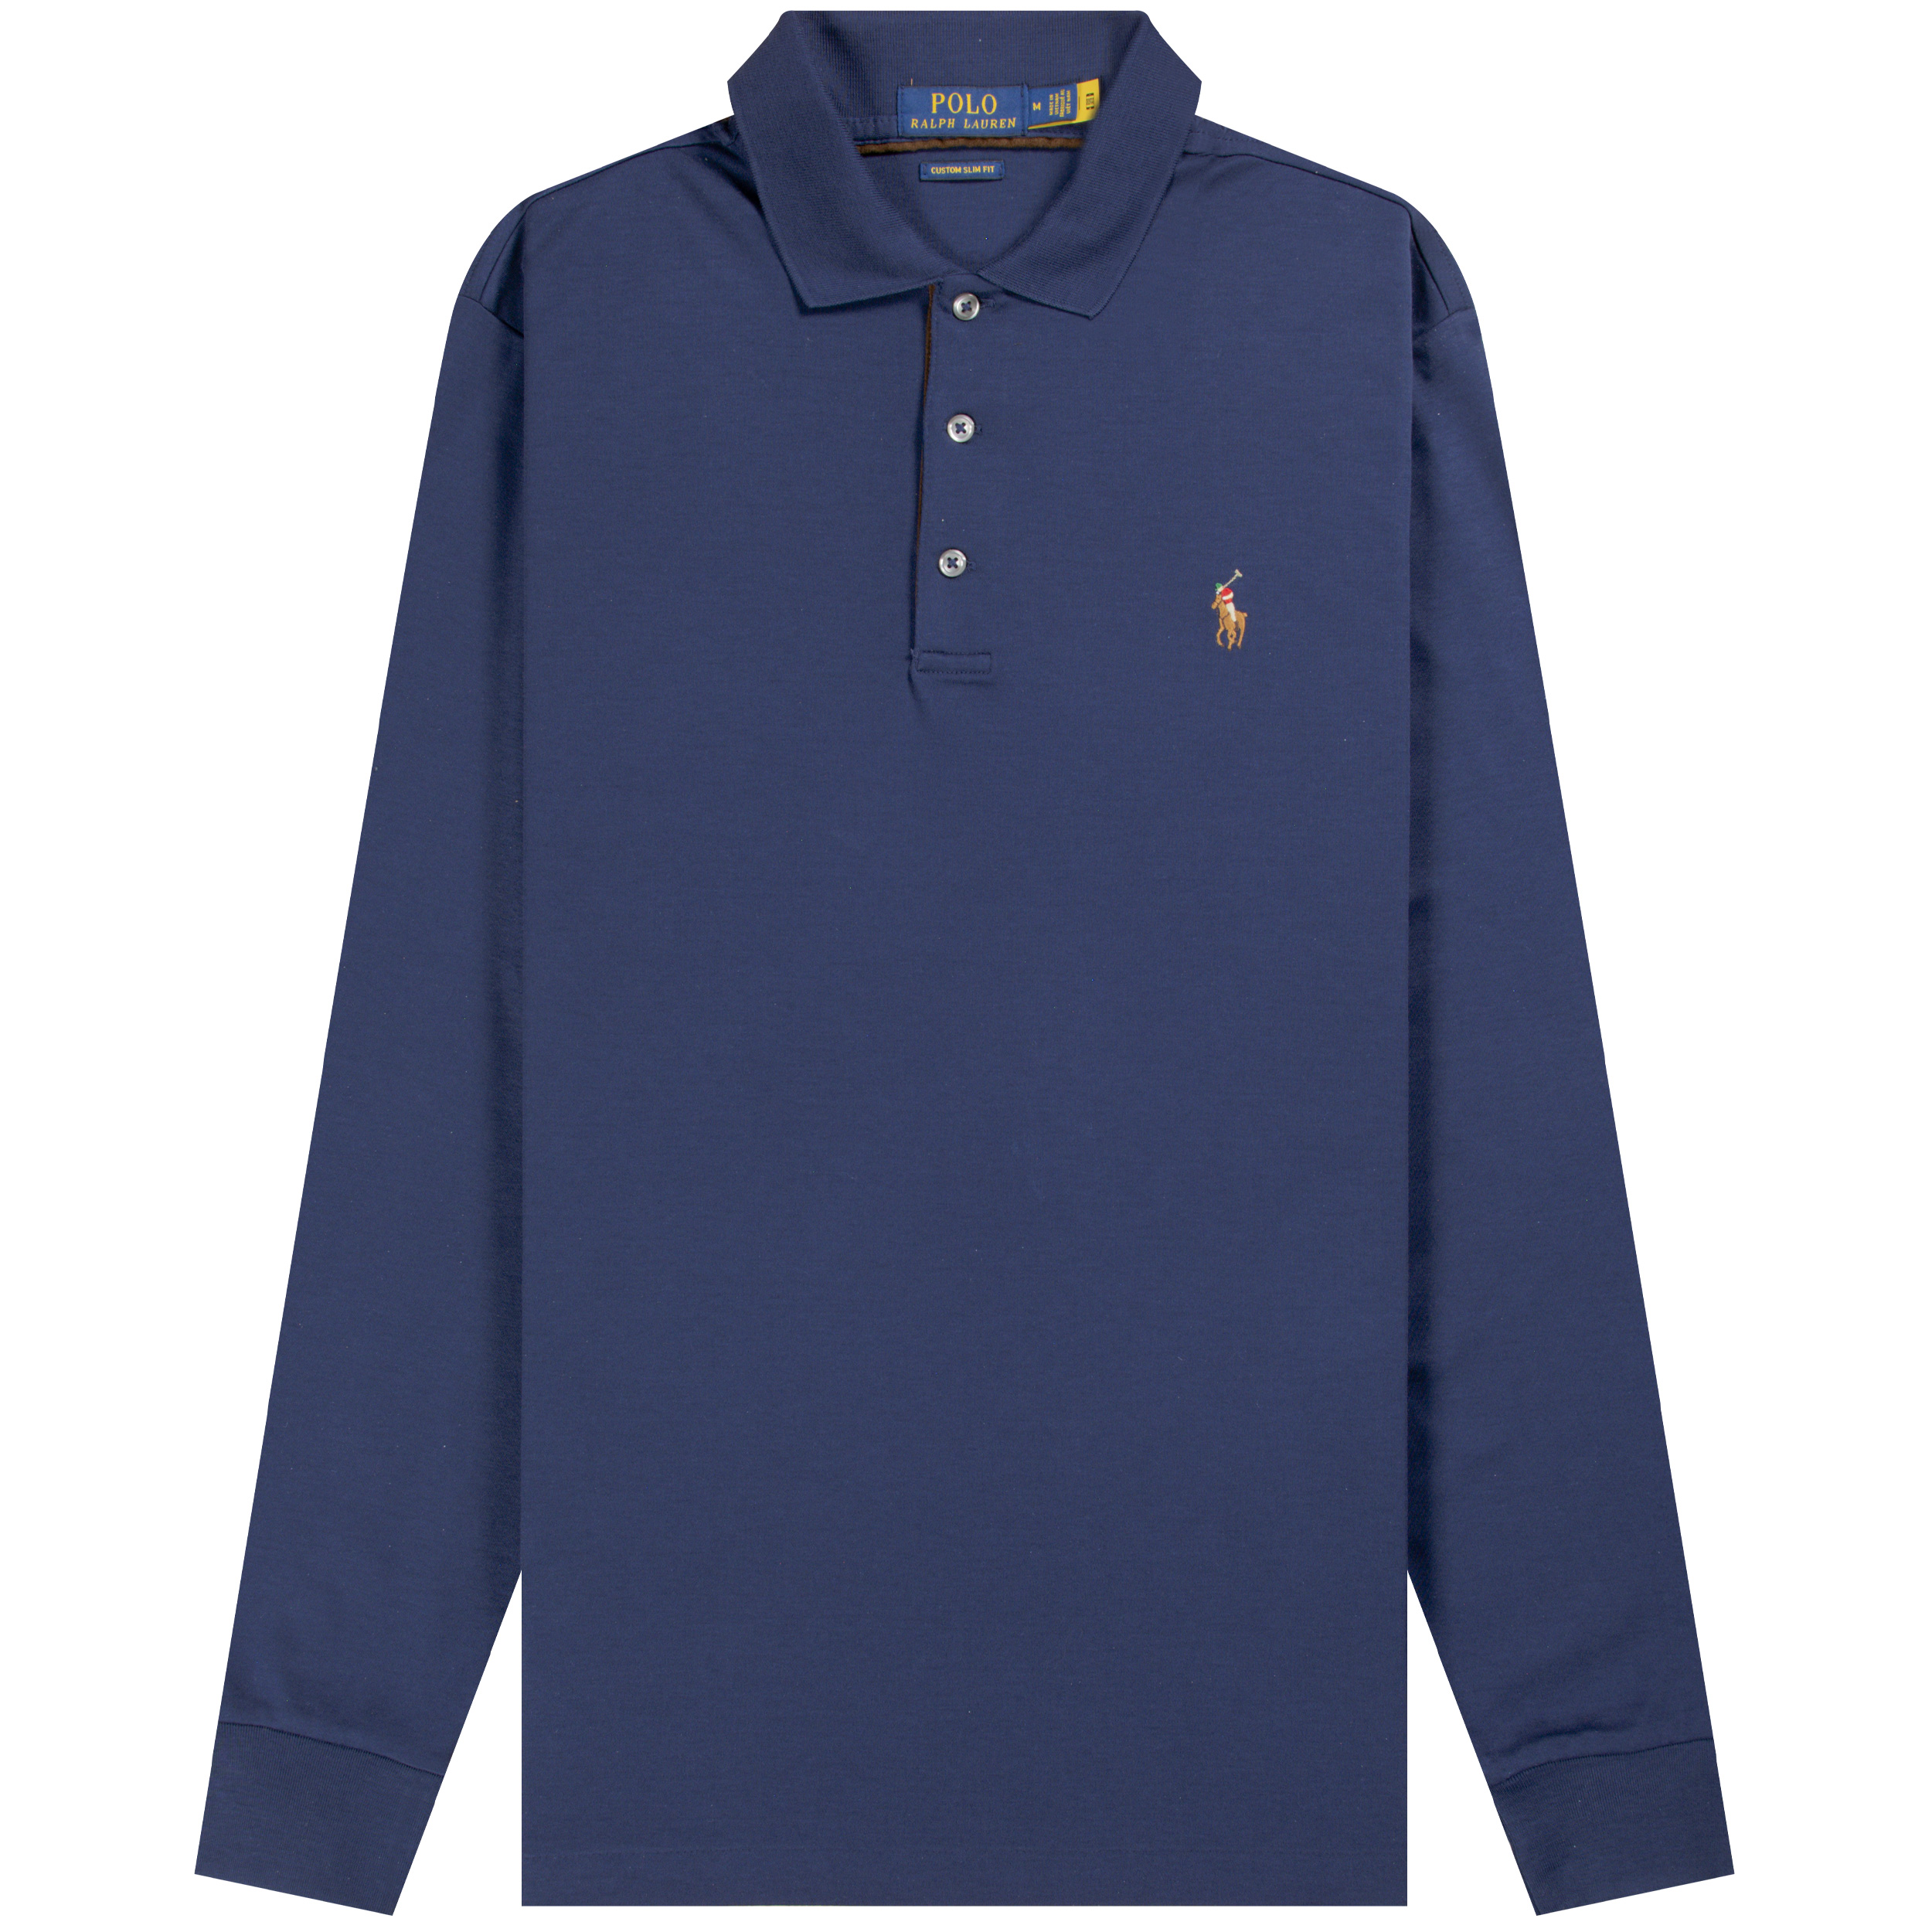 Polo Ralph Lauren ’Long Sleeve’ Slim Fit Soft Touch Polo Navy